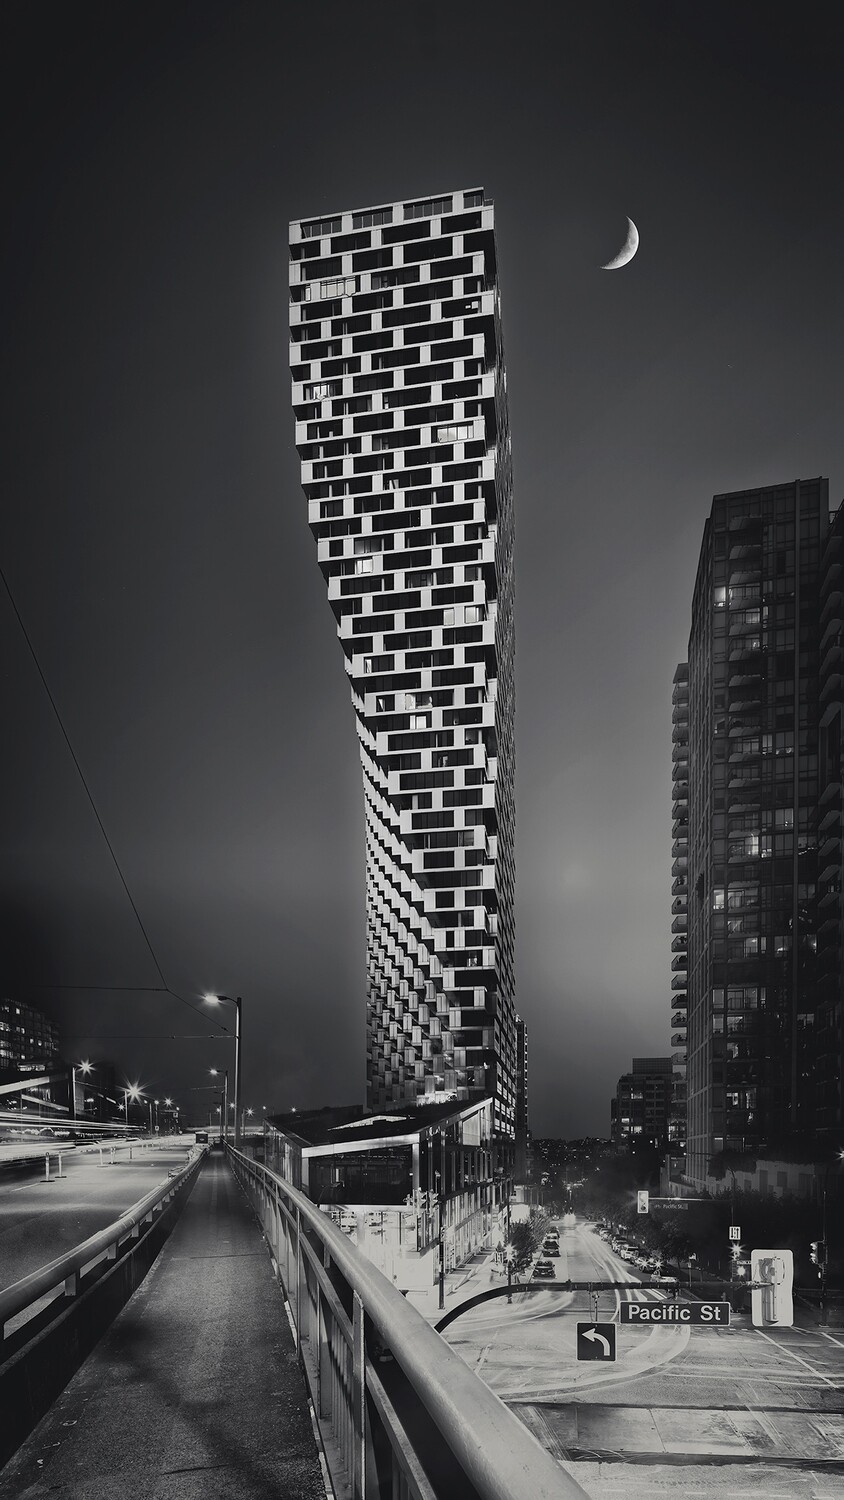 Vancouver House - The Neo-futurism